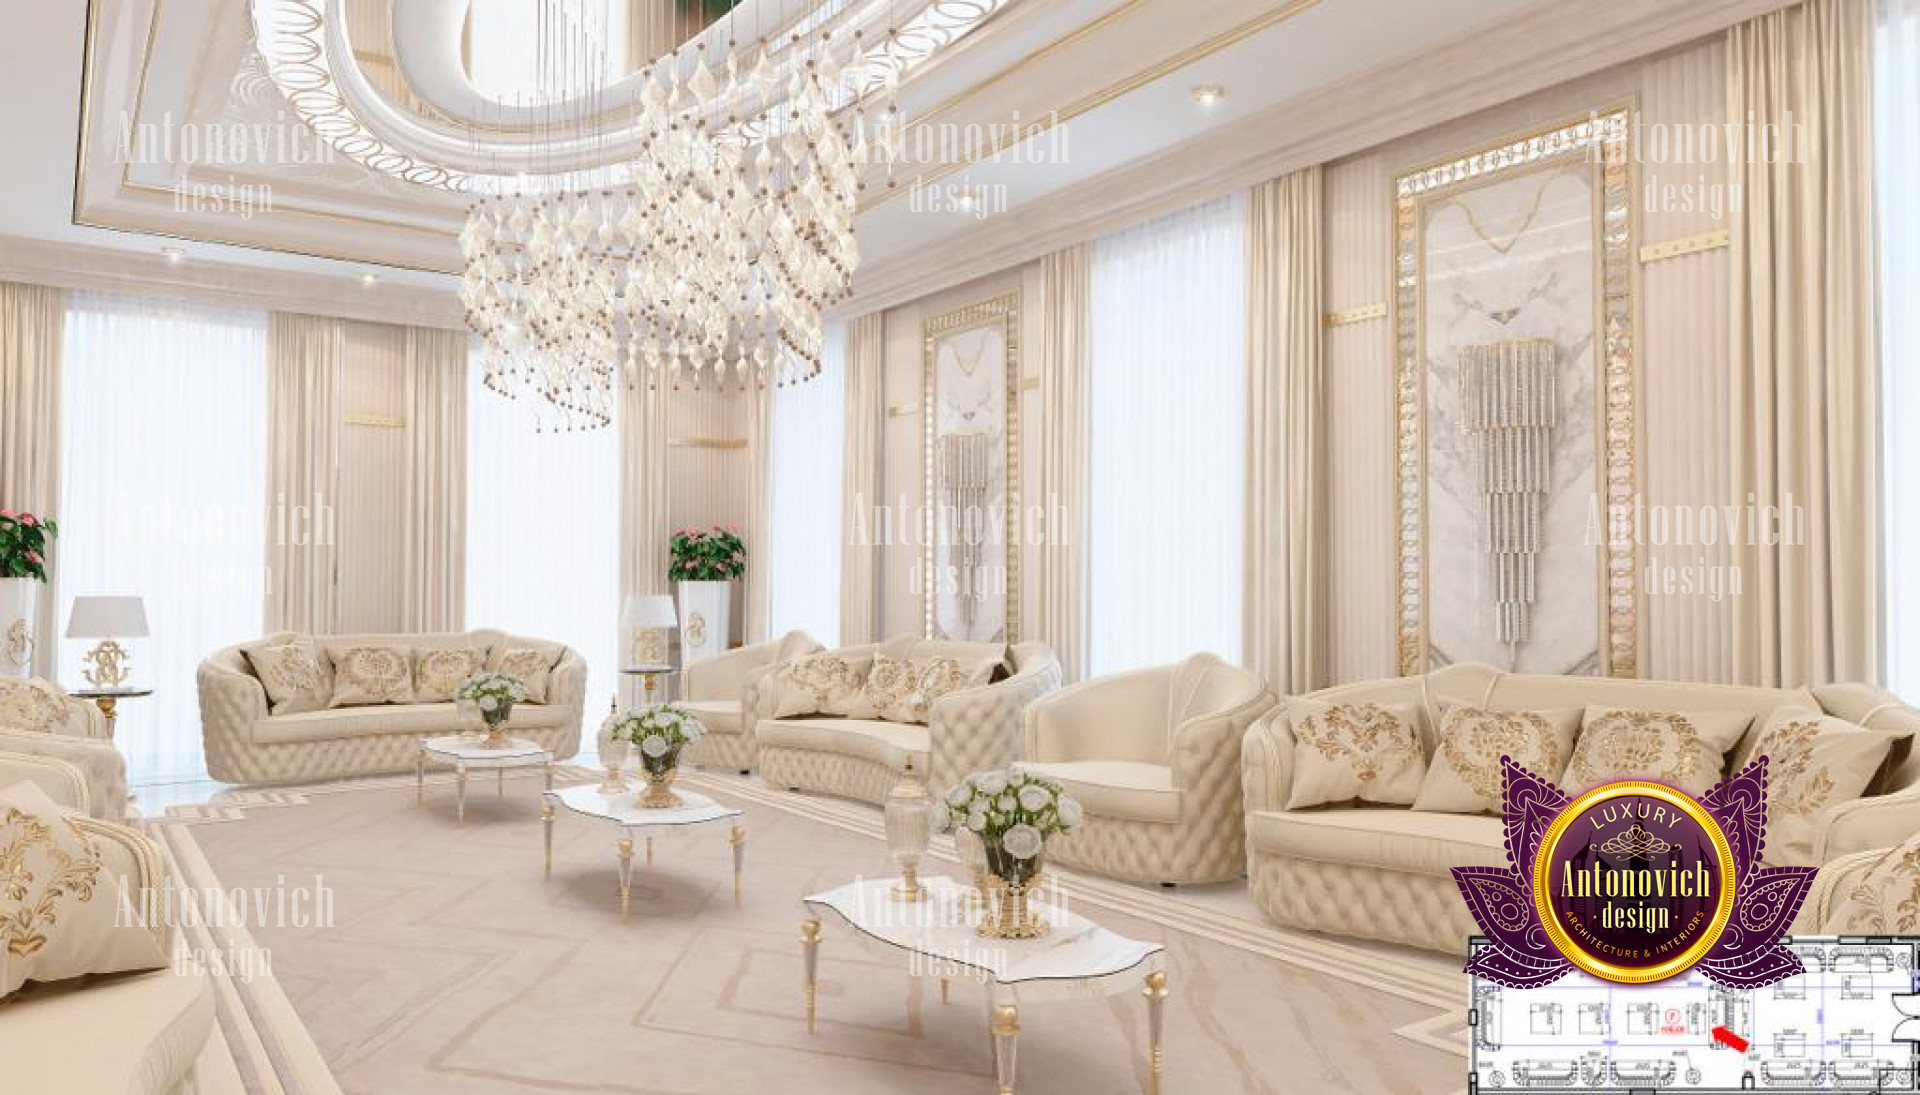 THE BEST INTERIOR DESIGN COMPANY IN JEDDAH